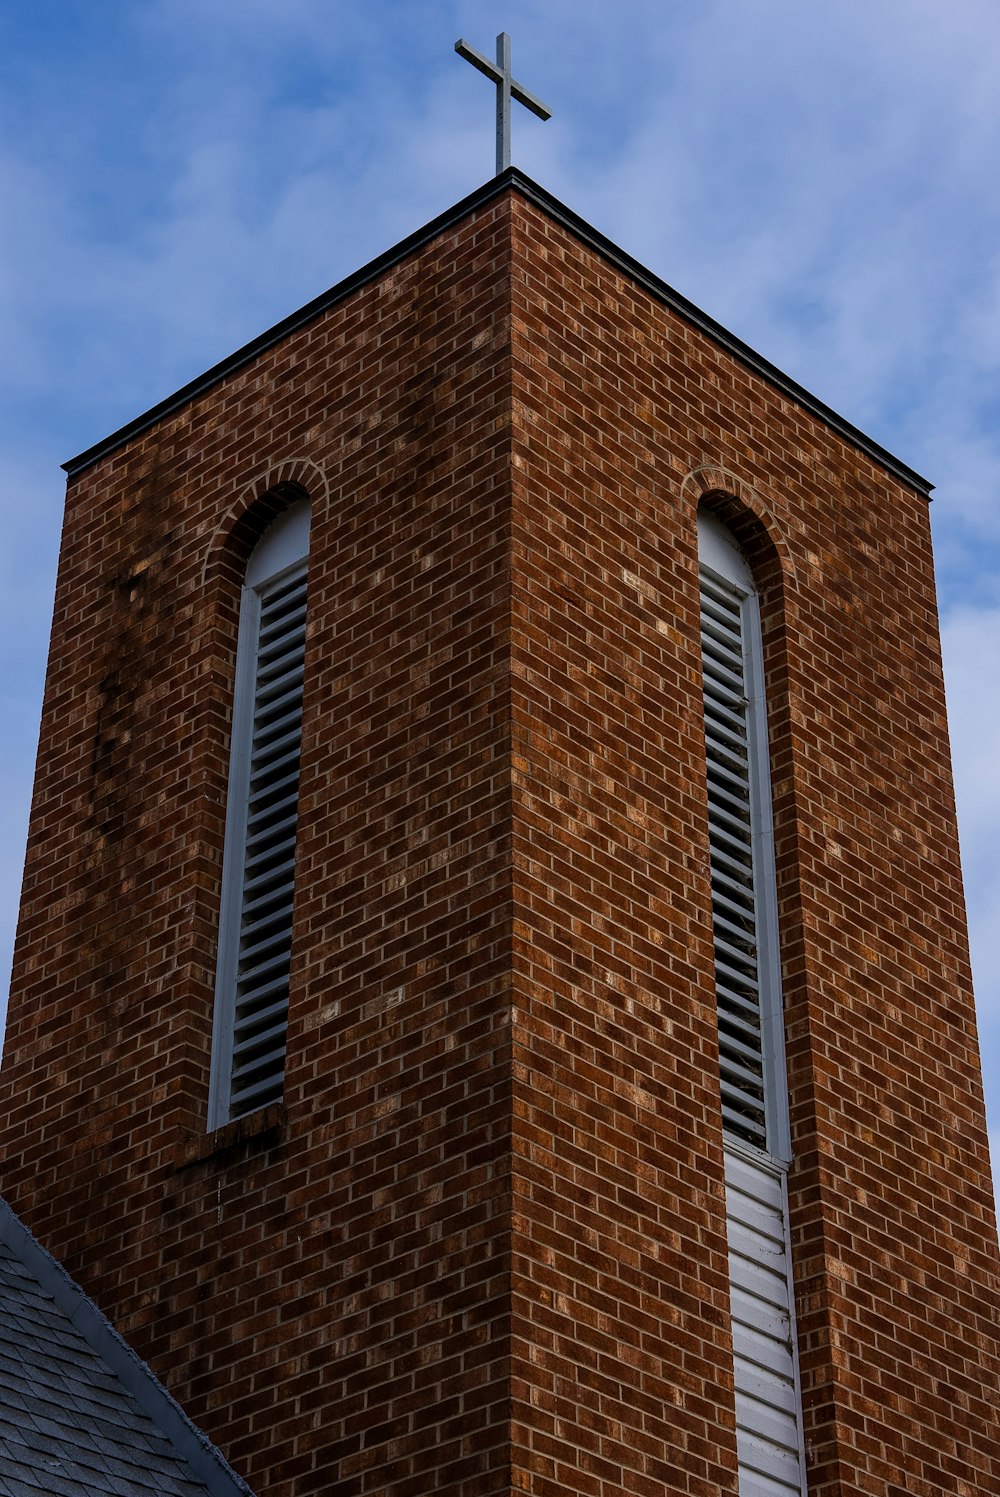 a brick building with a cross on top